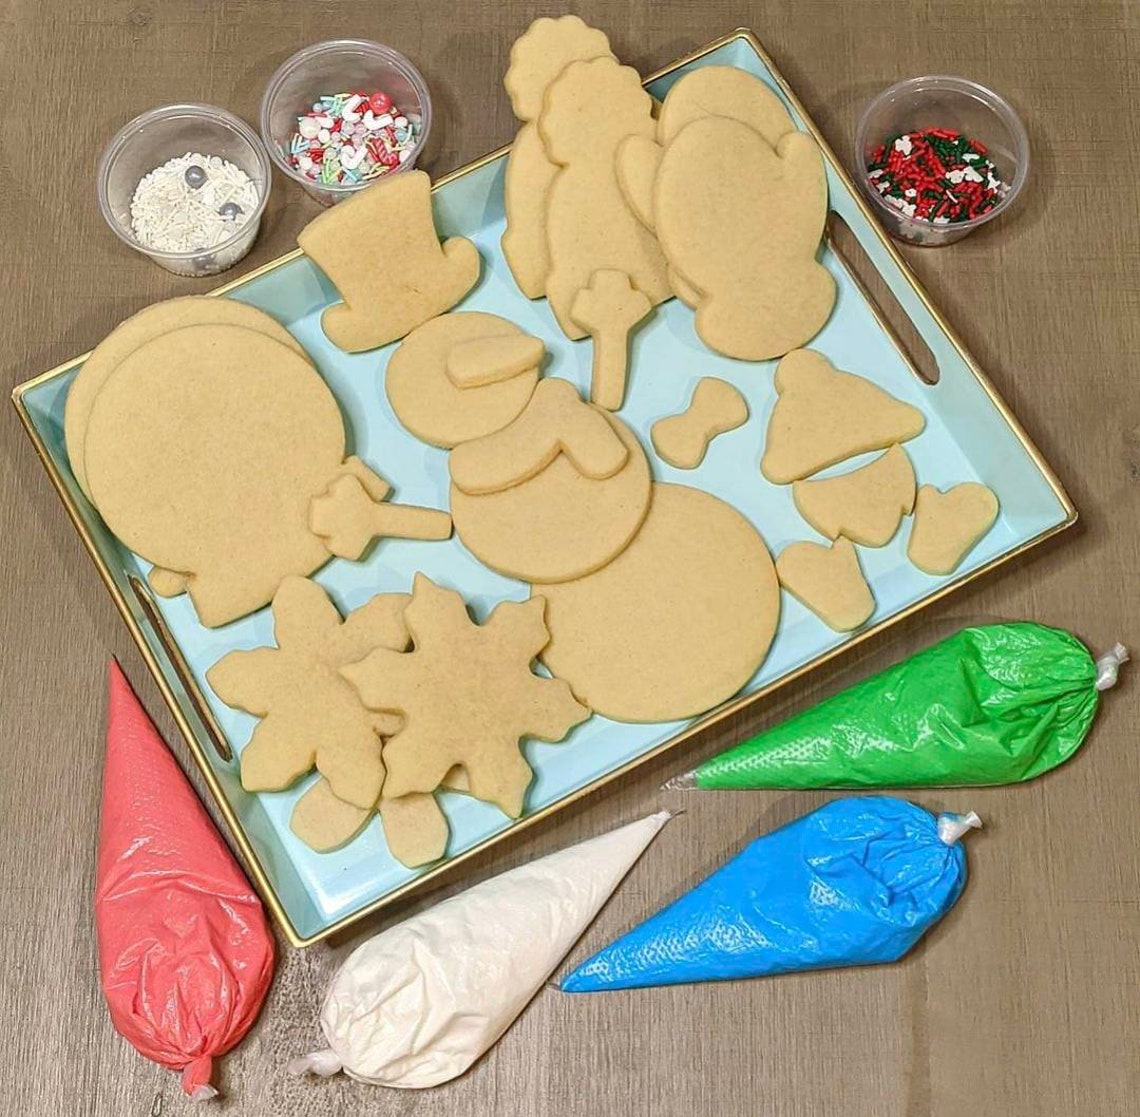 Snow Much Fun Cookie Decorating Kit